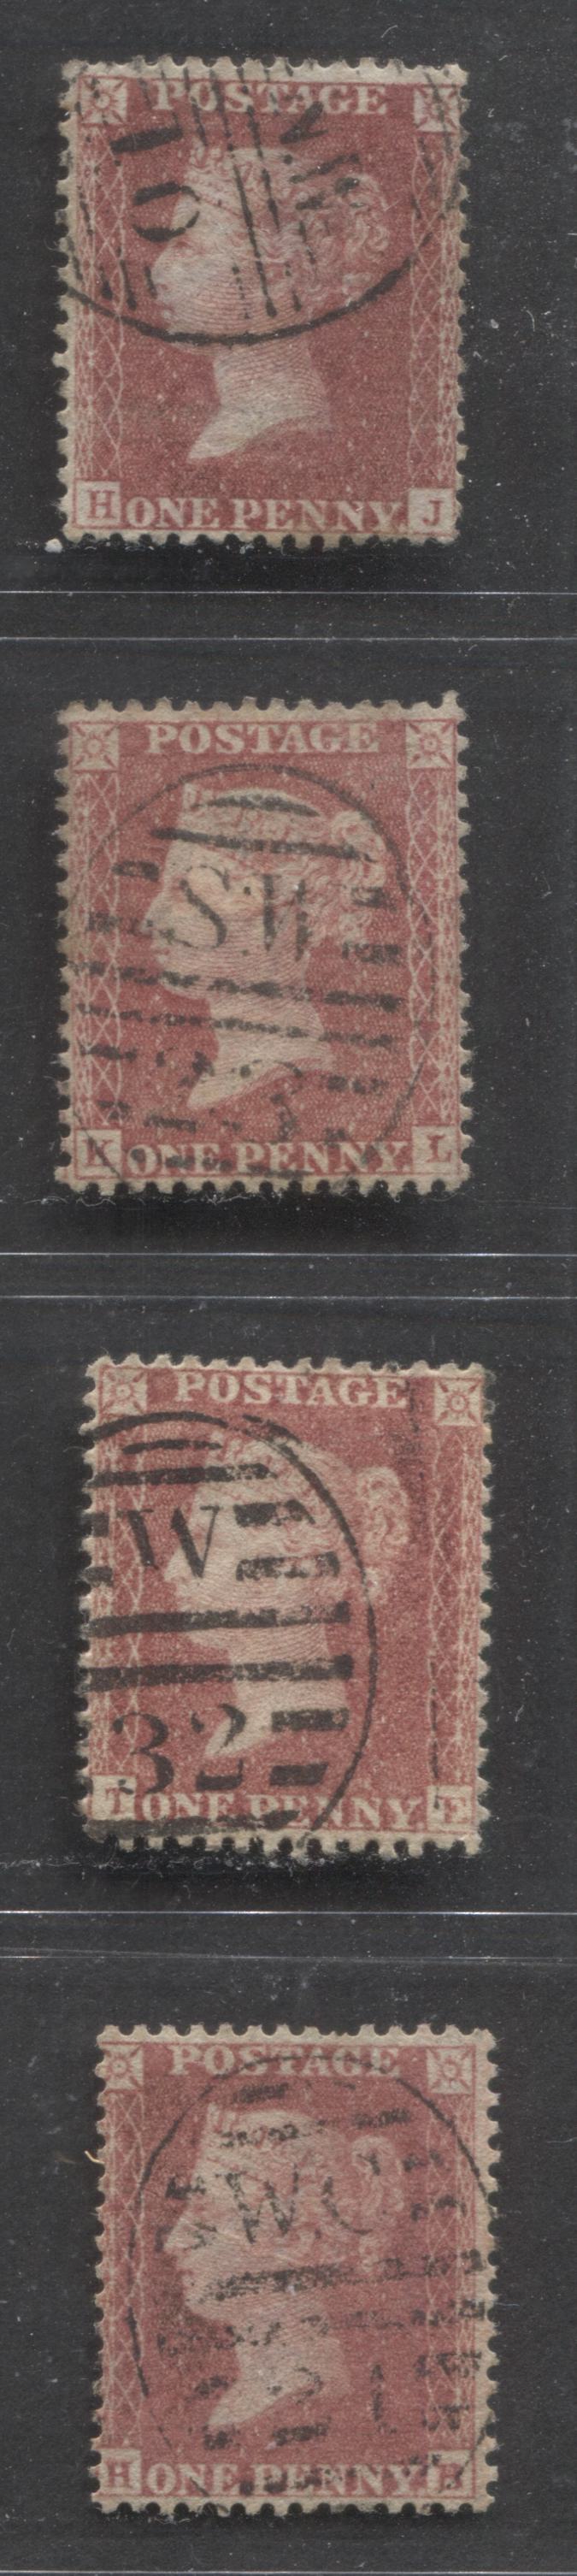 Lot  341 Great Britain - Dubus Type 3, 3R, 5, & 8 Vertical Numeral London Duplex Cancels  SC#20 1d Rose Red 1857-1863 1d Red Stars, Large Crown, White Paper, Perf. 14 Issue, W#32, SW #23, NW #10 And WC #21, 4 VF Used Singles, Estimated Value $50